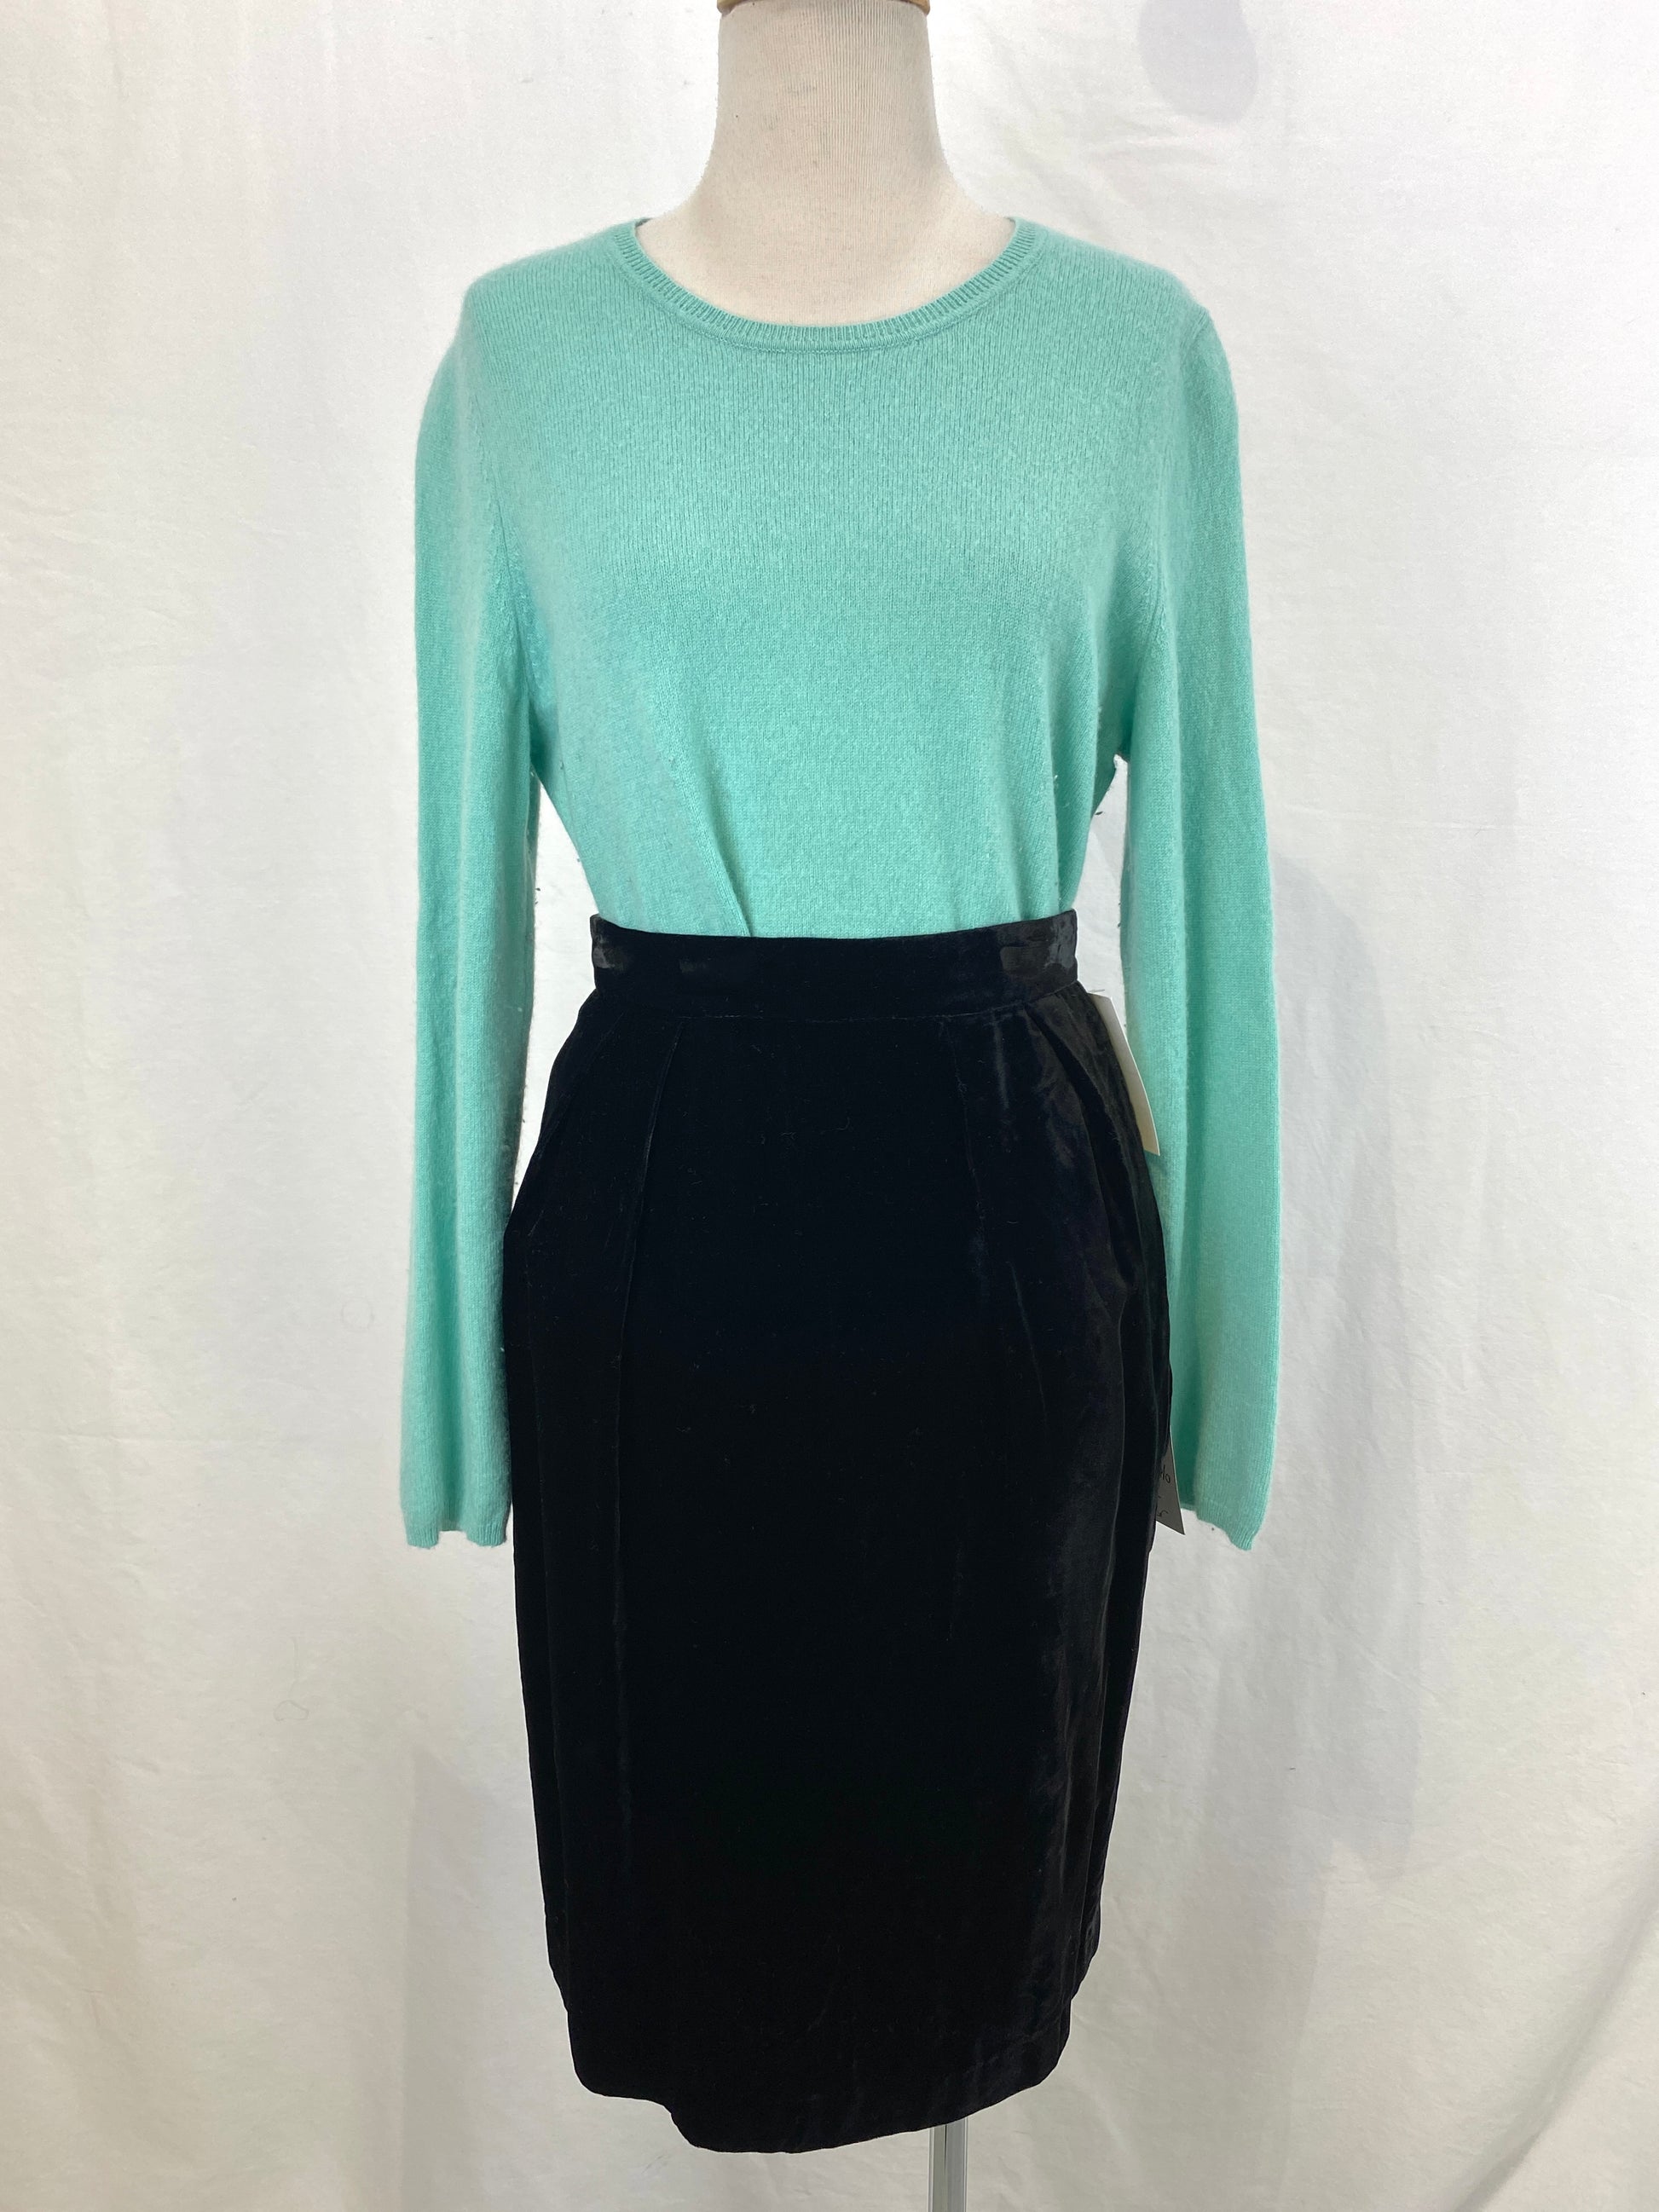 A vintage green cashmere sweater tucked into a black skirt. Ian Drummond Vintage. 